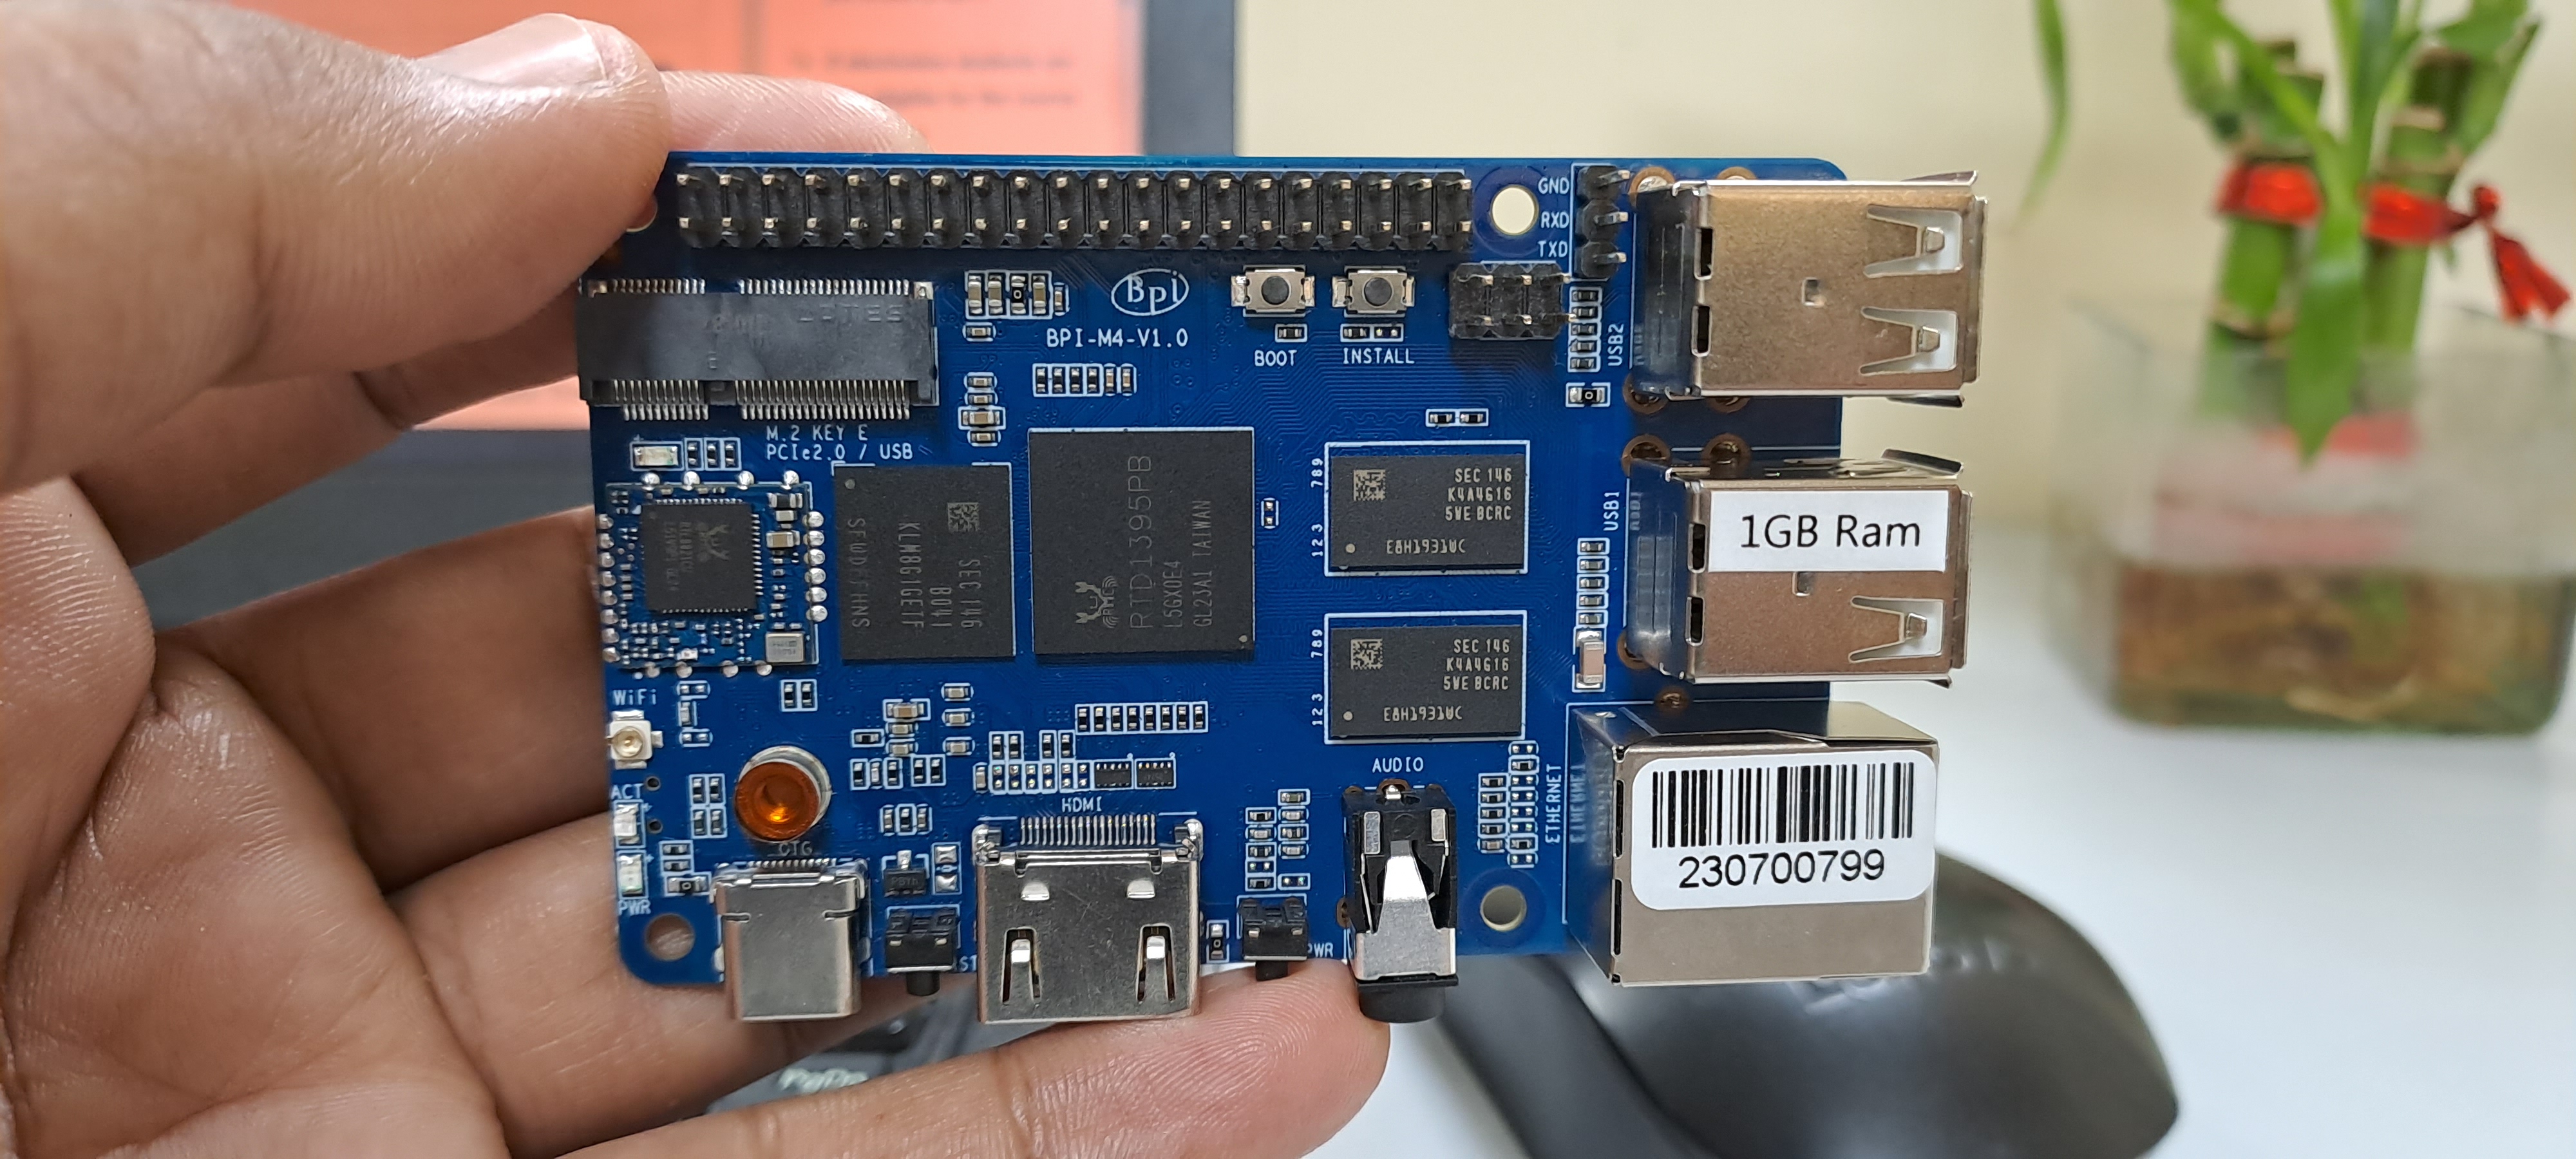 The Banana Pi BPI-M4 looks like a Raspberry Pi Board clone and has built-in eMMC flash and M.2 Socket compatibility.